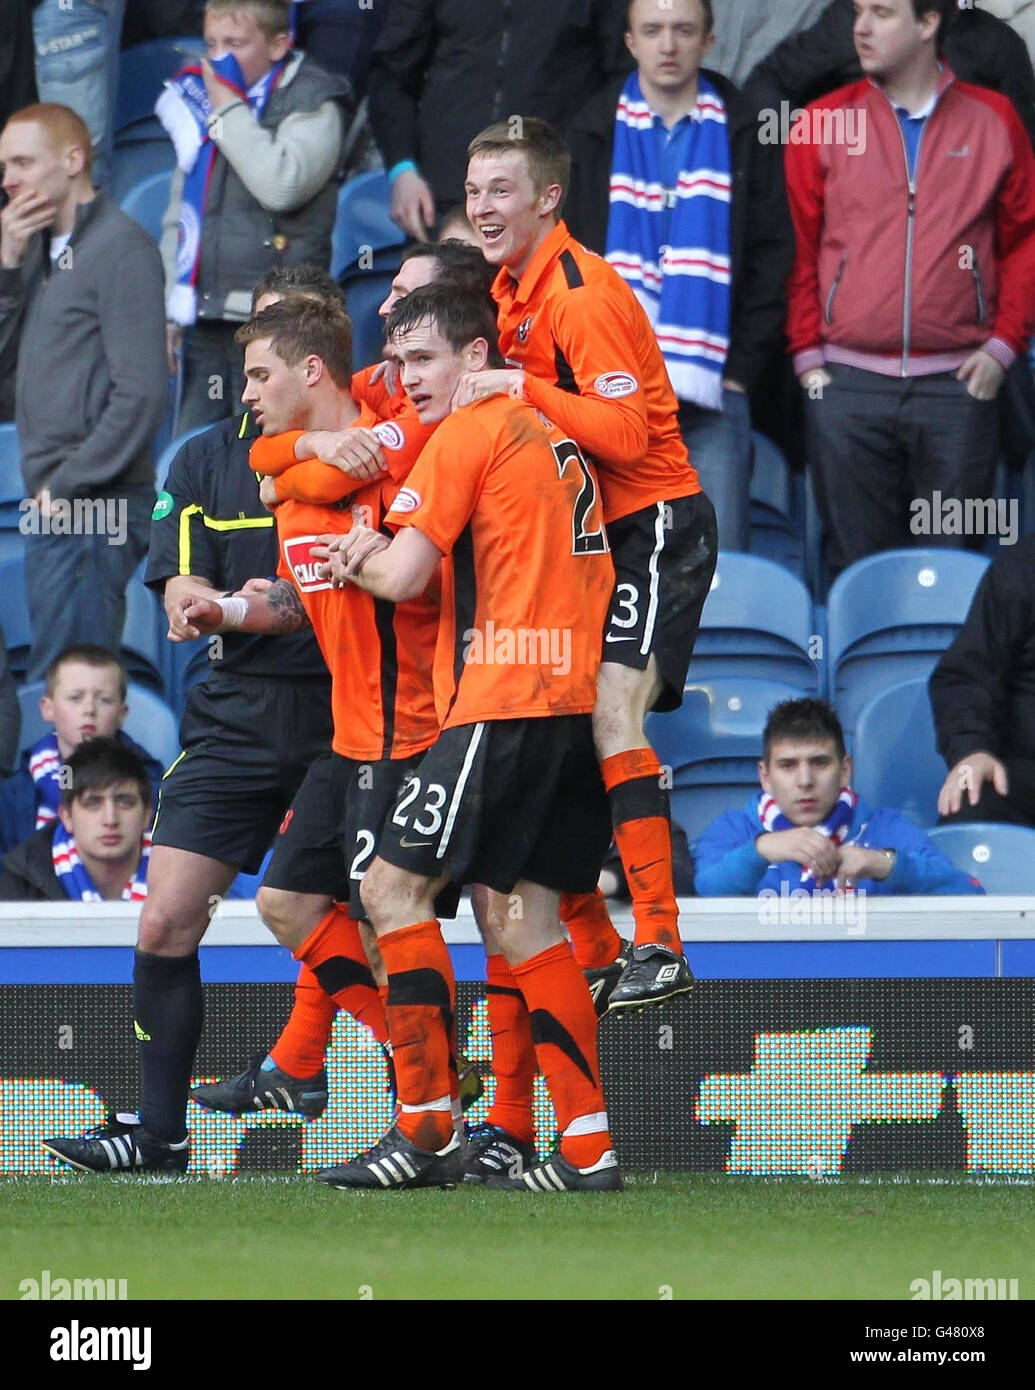 Dundee United's David Goodwillie celebrates the winning goal during the Clydesdale Bank Scottish Premier League match at Ibrox Stadium, Glasgow. Stock Photo